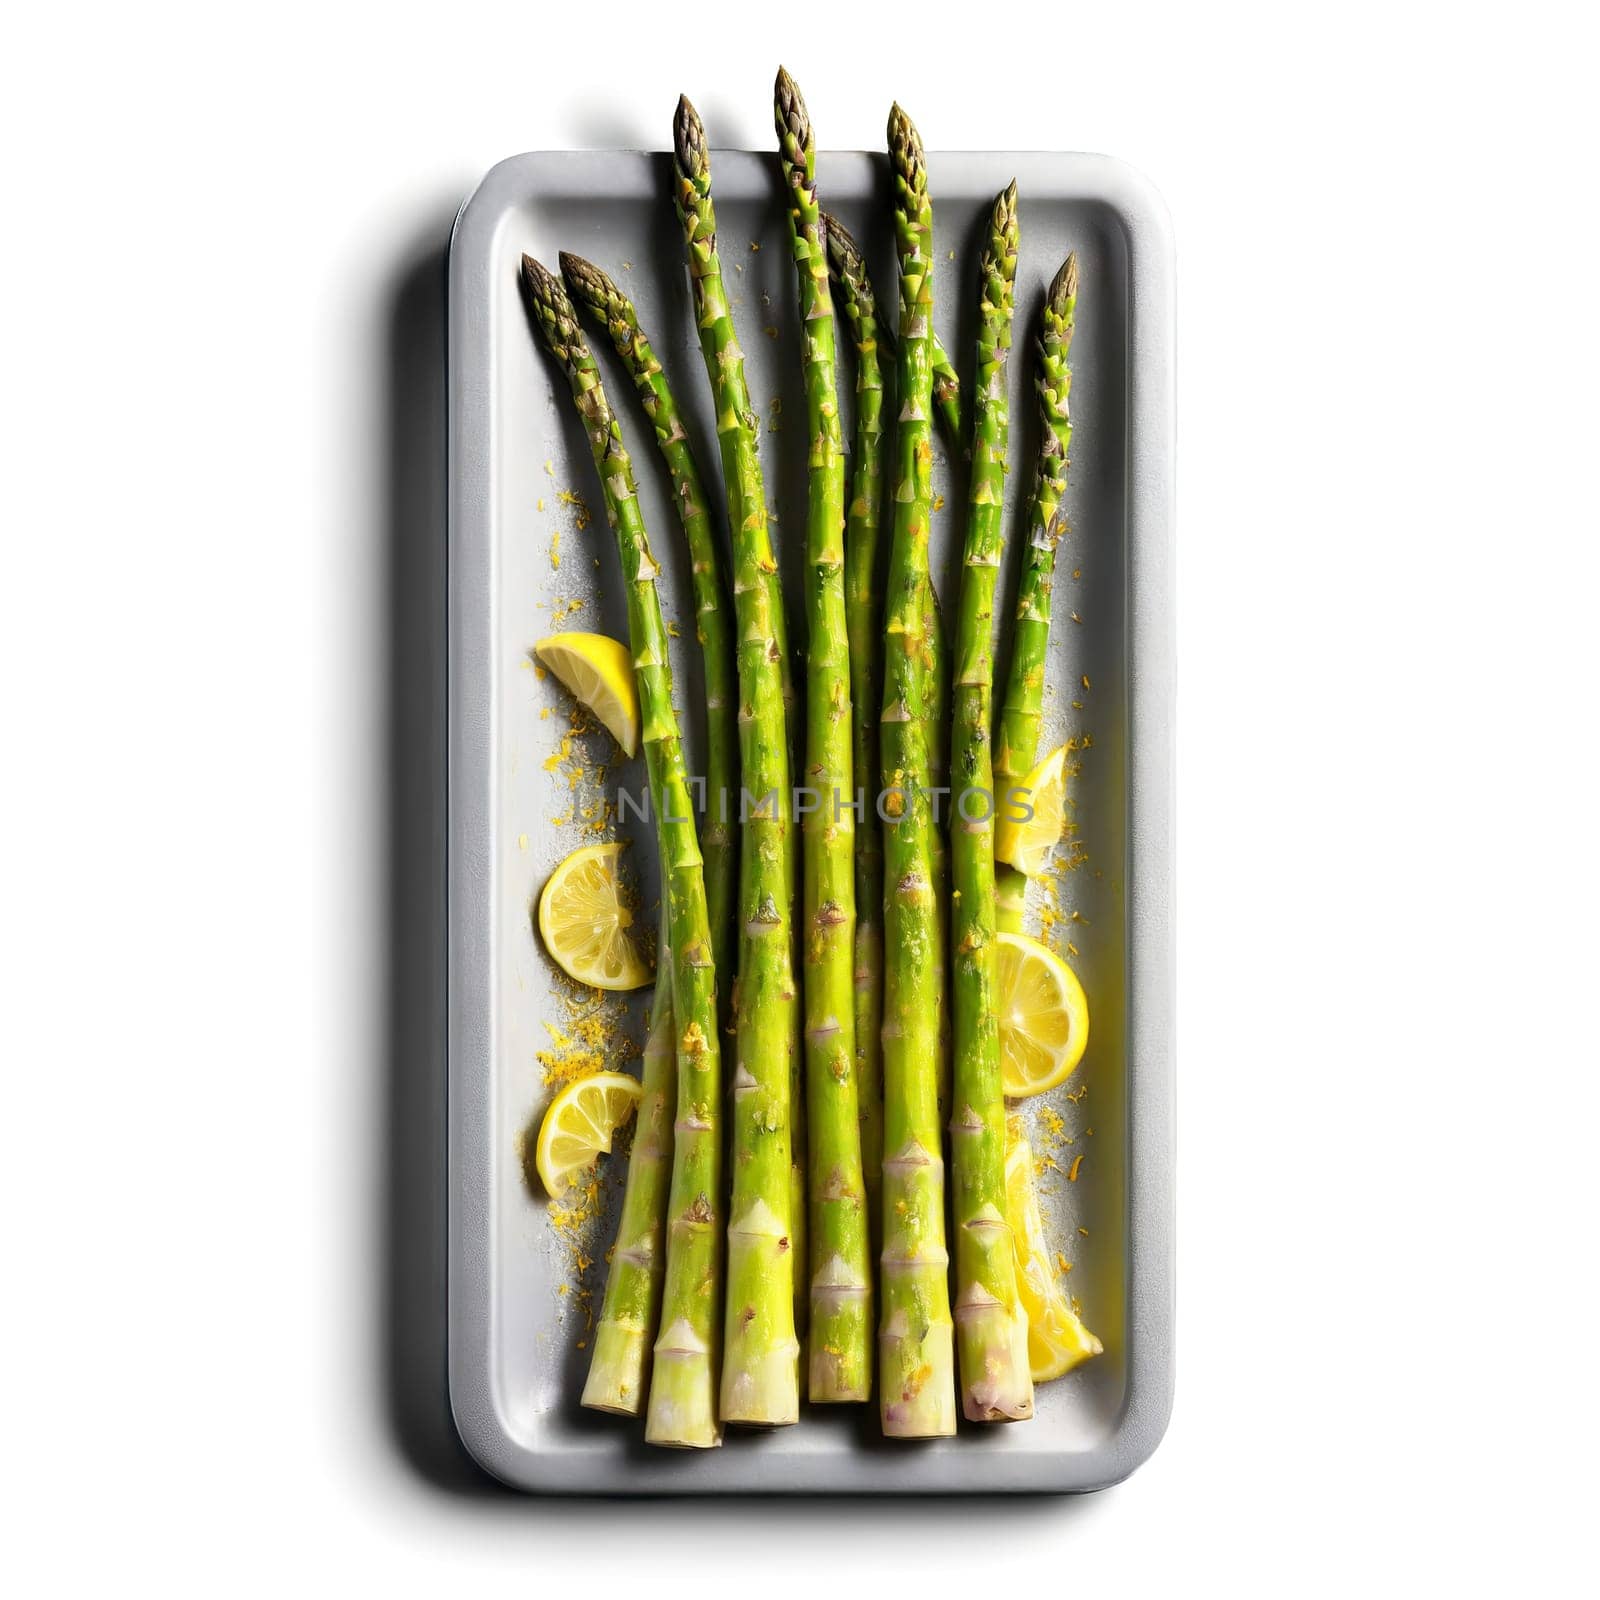 Grilled asparagus with lemon zest parmesan cheese and a sprinkle of black pepper on a by panophotograph